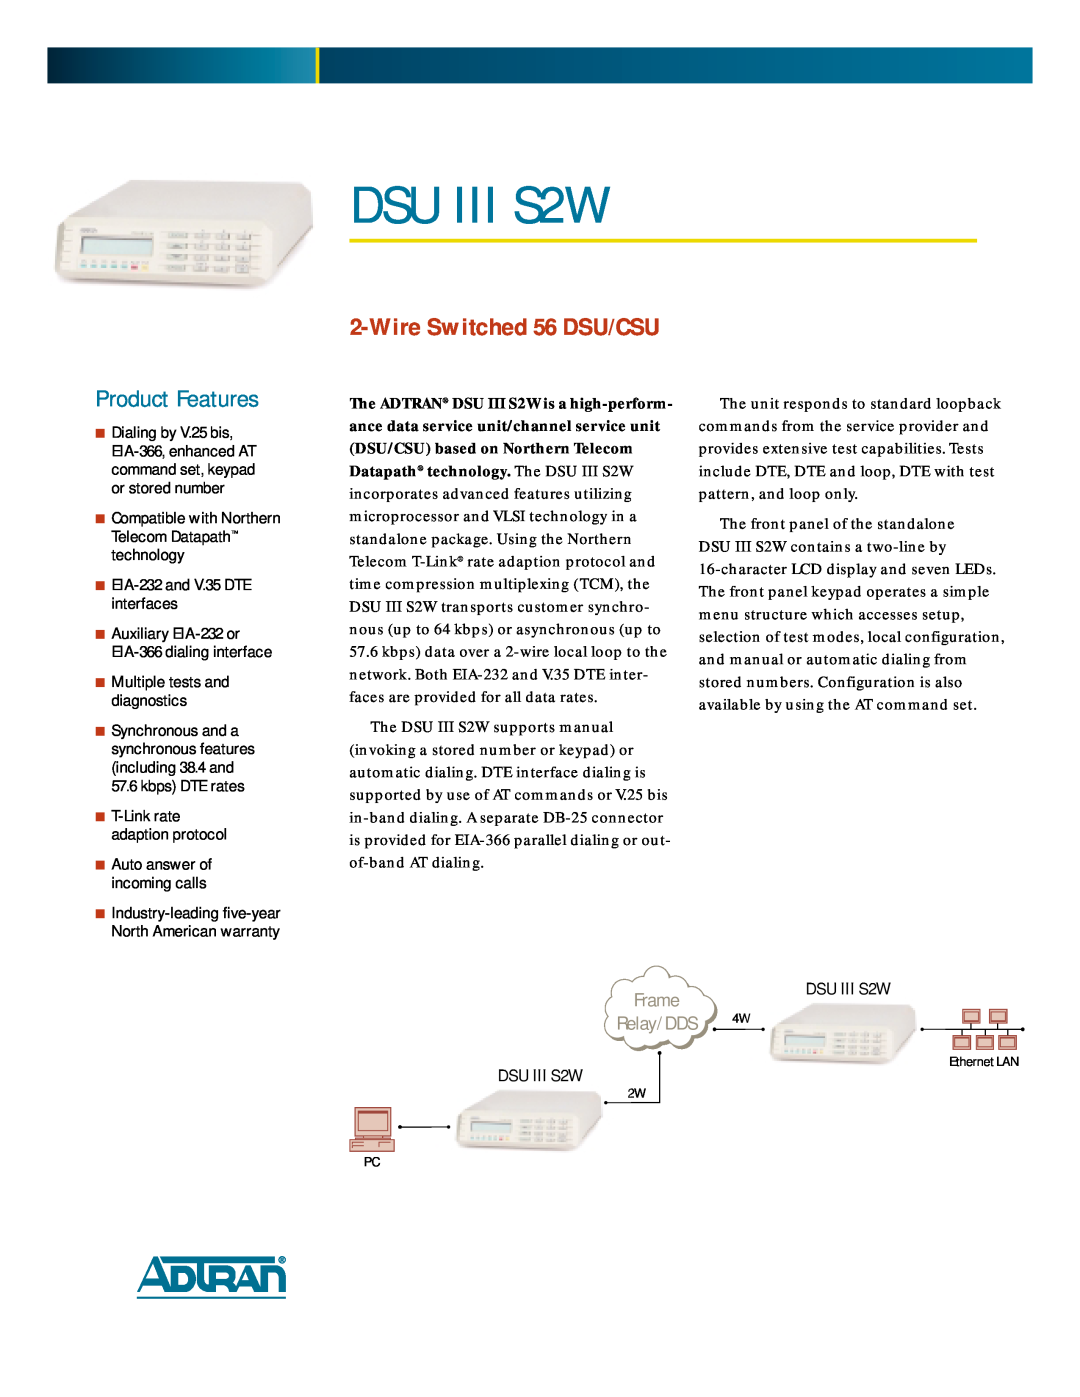 ADTRAN DSU III S2W warranty Product Features, Wire Switched 56 DSU/CSU, EIA-232 and V.35 DTE interfaces, kbps DTE rates 